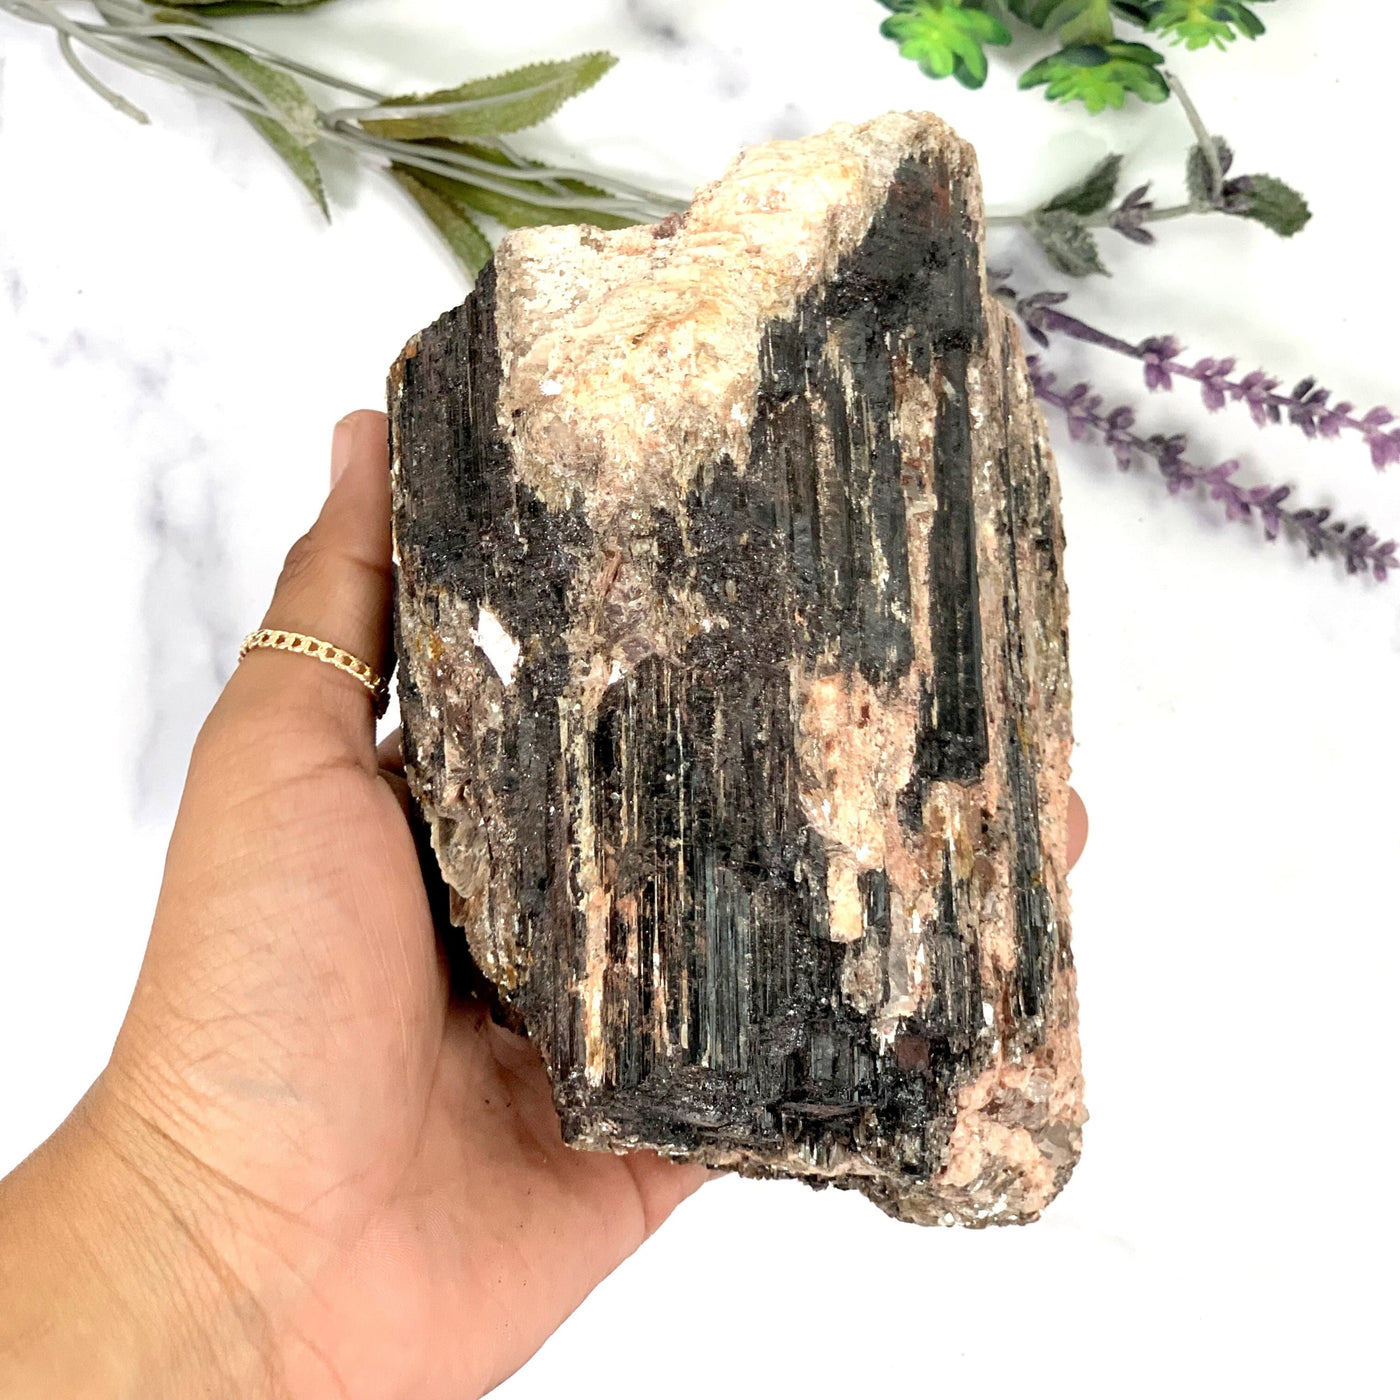 hand holding up Black Tourmaline with Mica on Matrix on marble background with plants